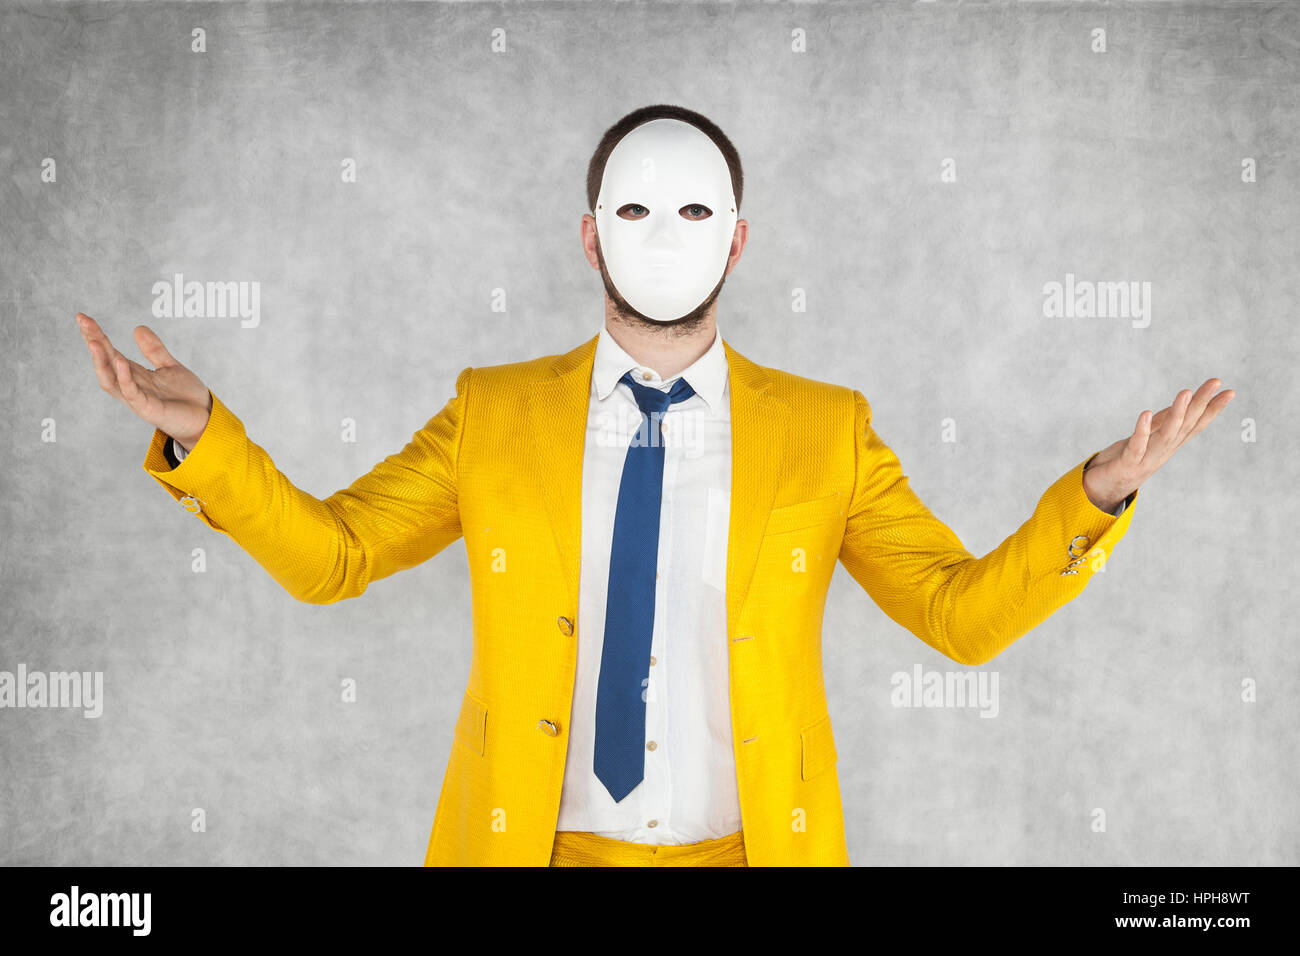 incognito person spread his hands in helplessness Stock Photo - Alamy